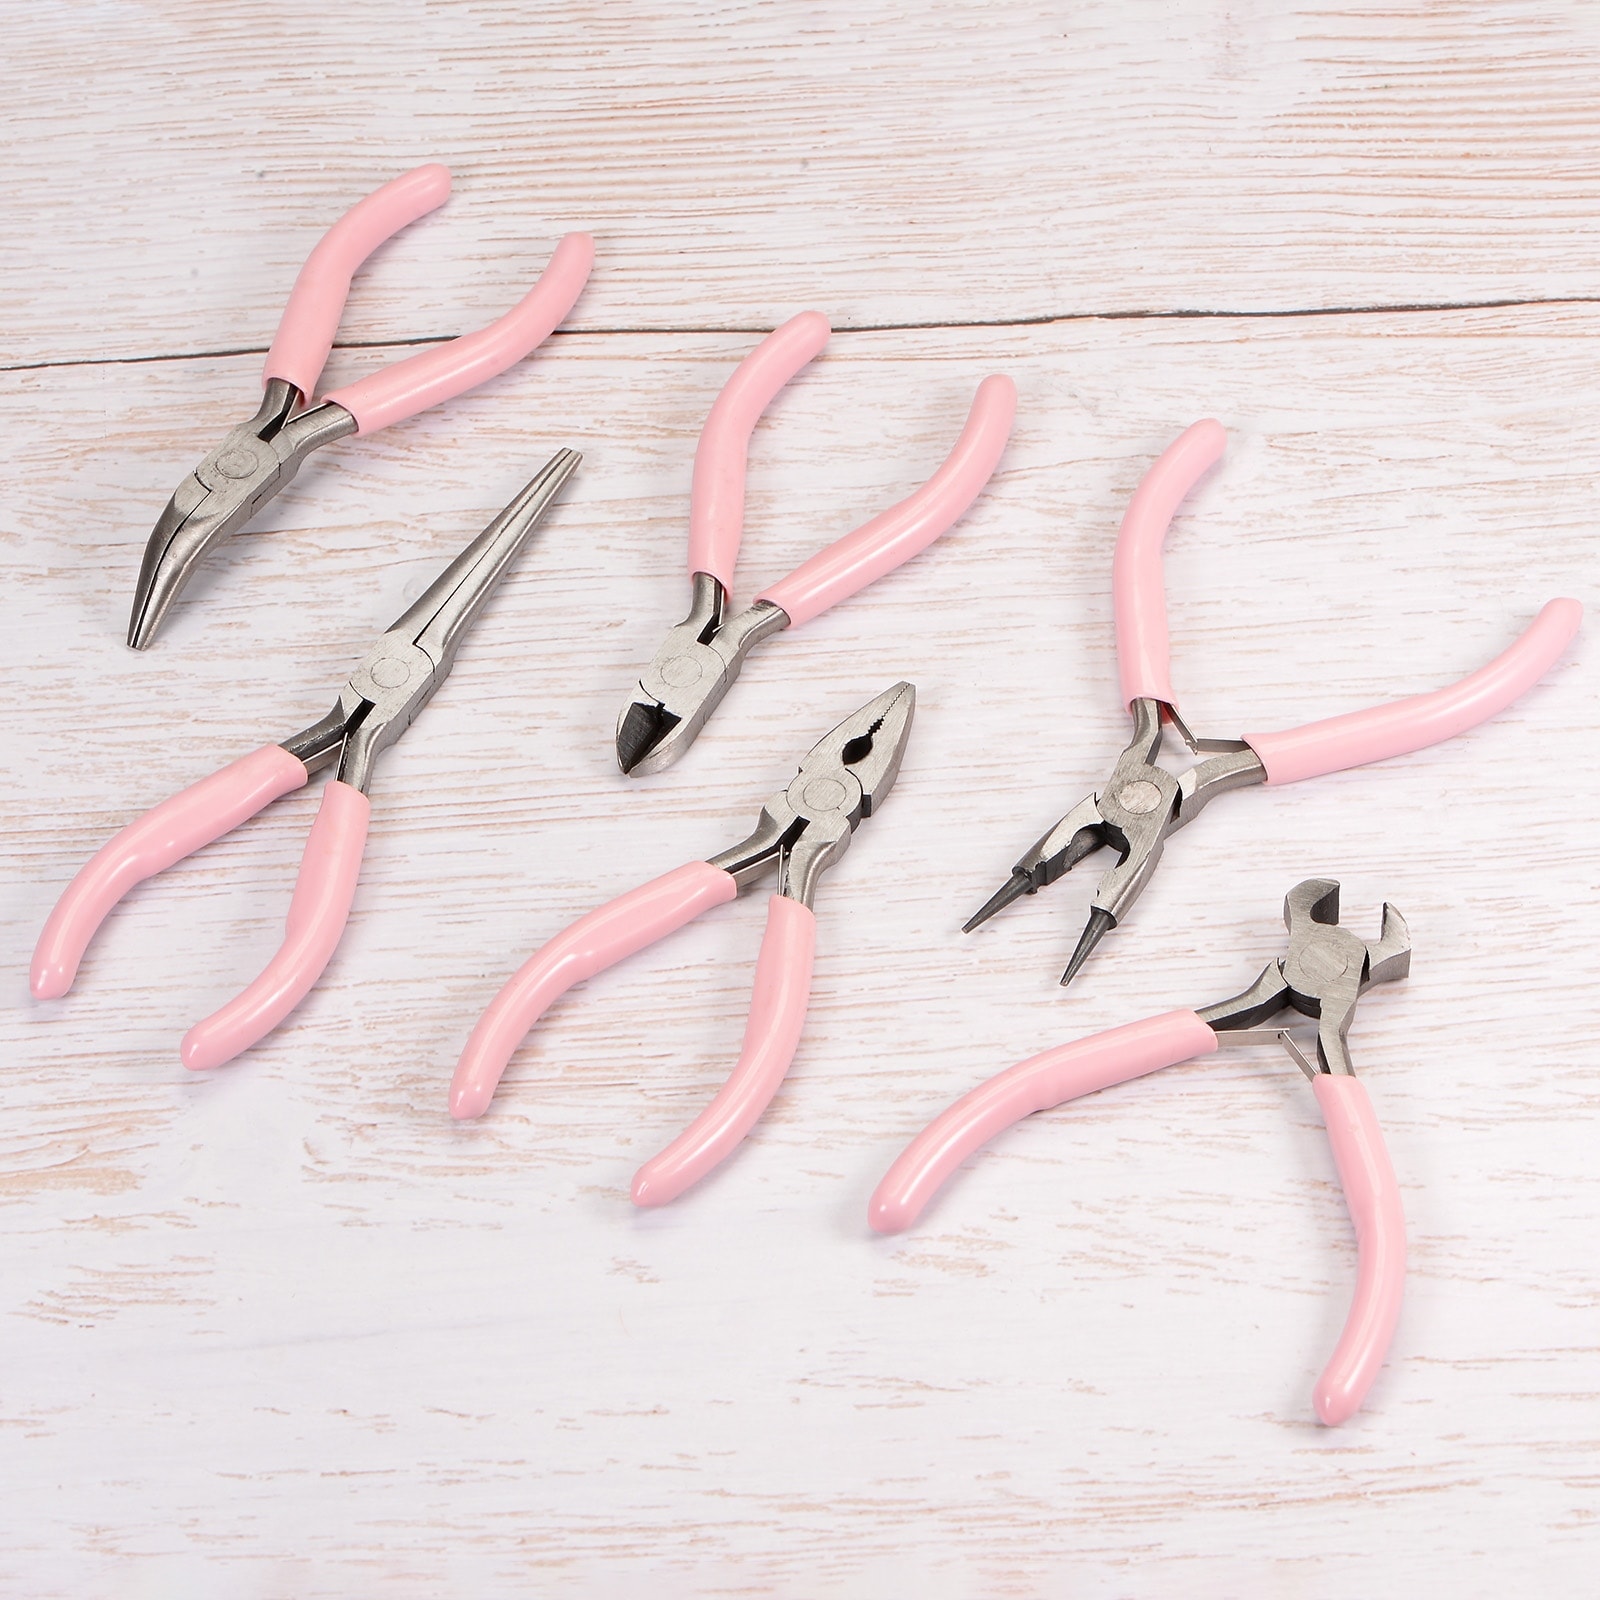 4.5 inch Mini Lengthen Extra Long Nose Toothless Jaw Precision Pliers